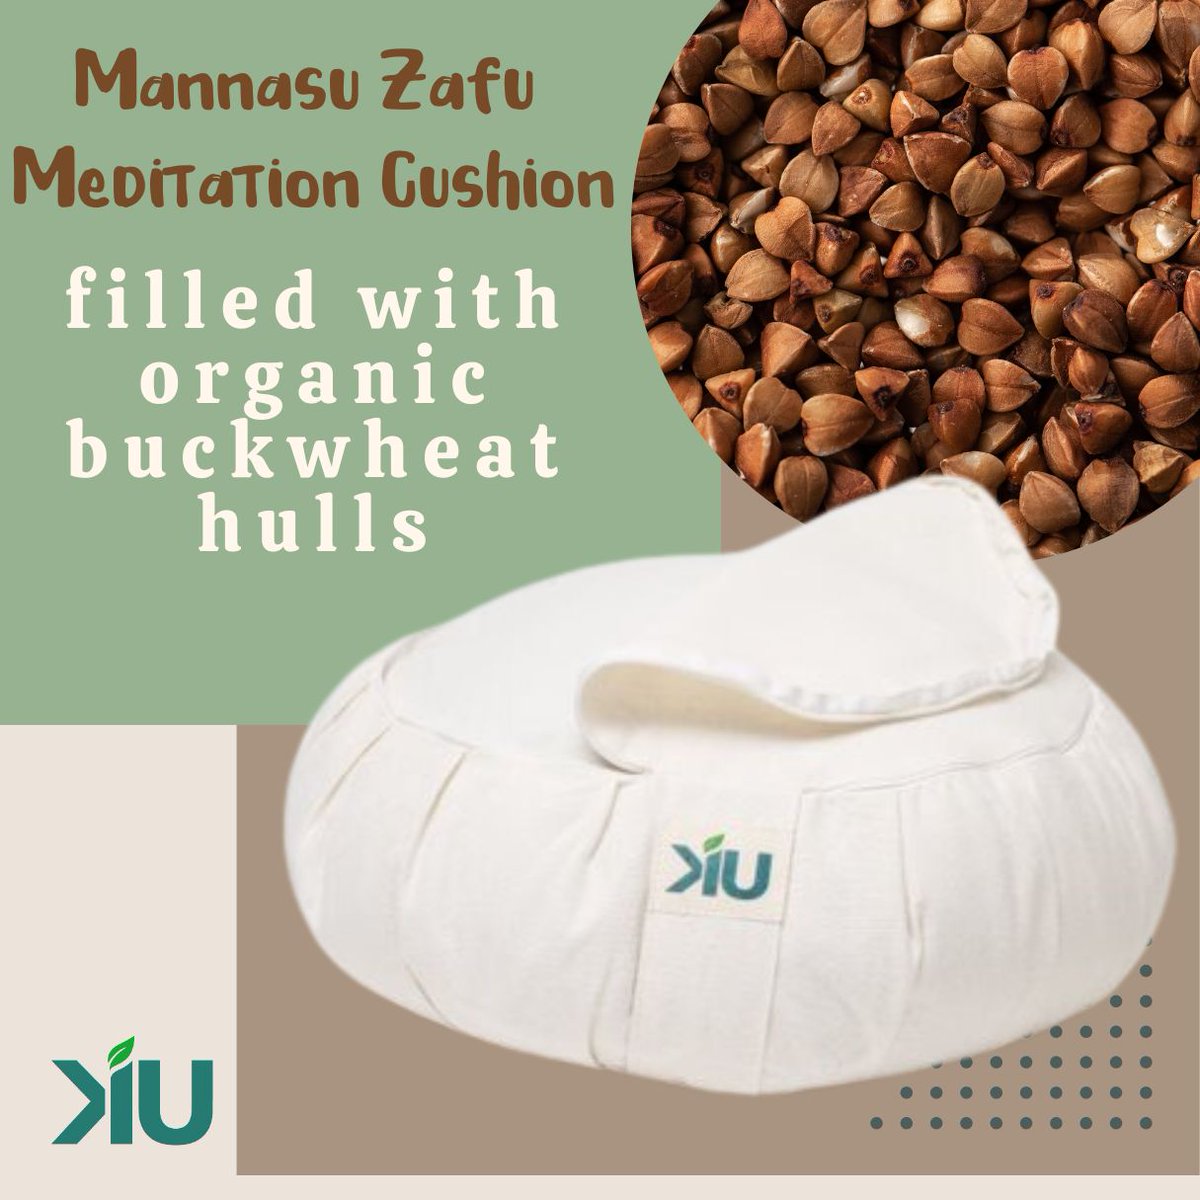 Our Zafu Meditation cushions are made with premium buckwheat hulls filling, recycled cotton ensuring a durable and long-lasting addition to your meditation practice. #meditationcushion #zafumeditationcushion #meditationpractice #mindfulnessmeditation #yogameditation